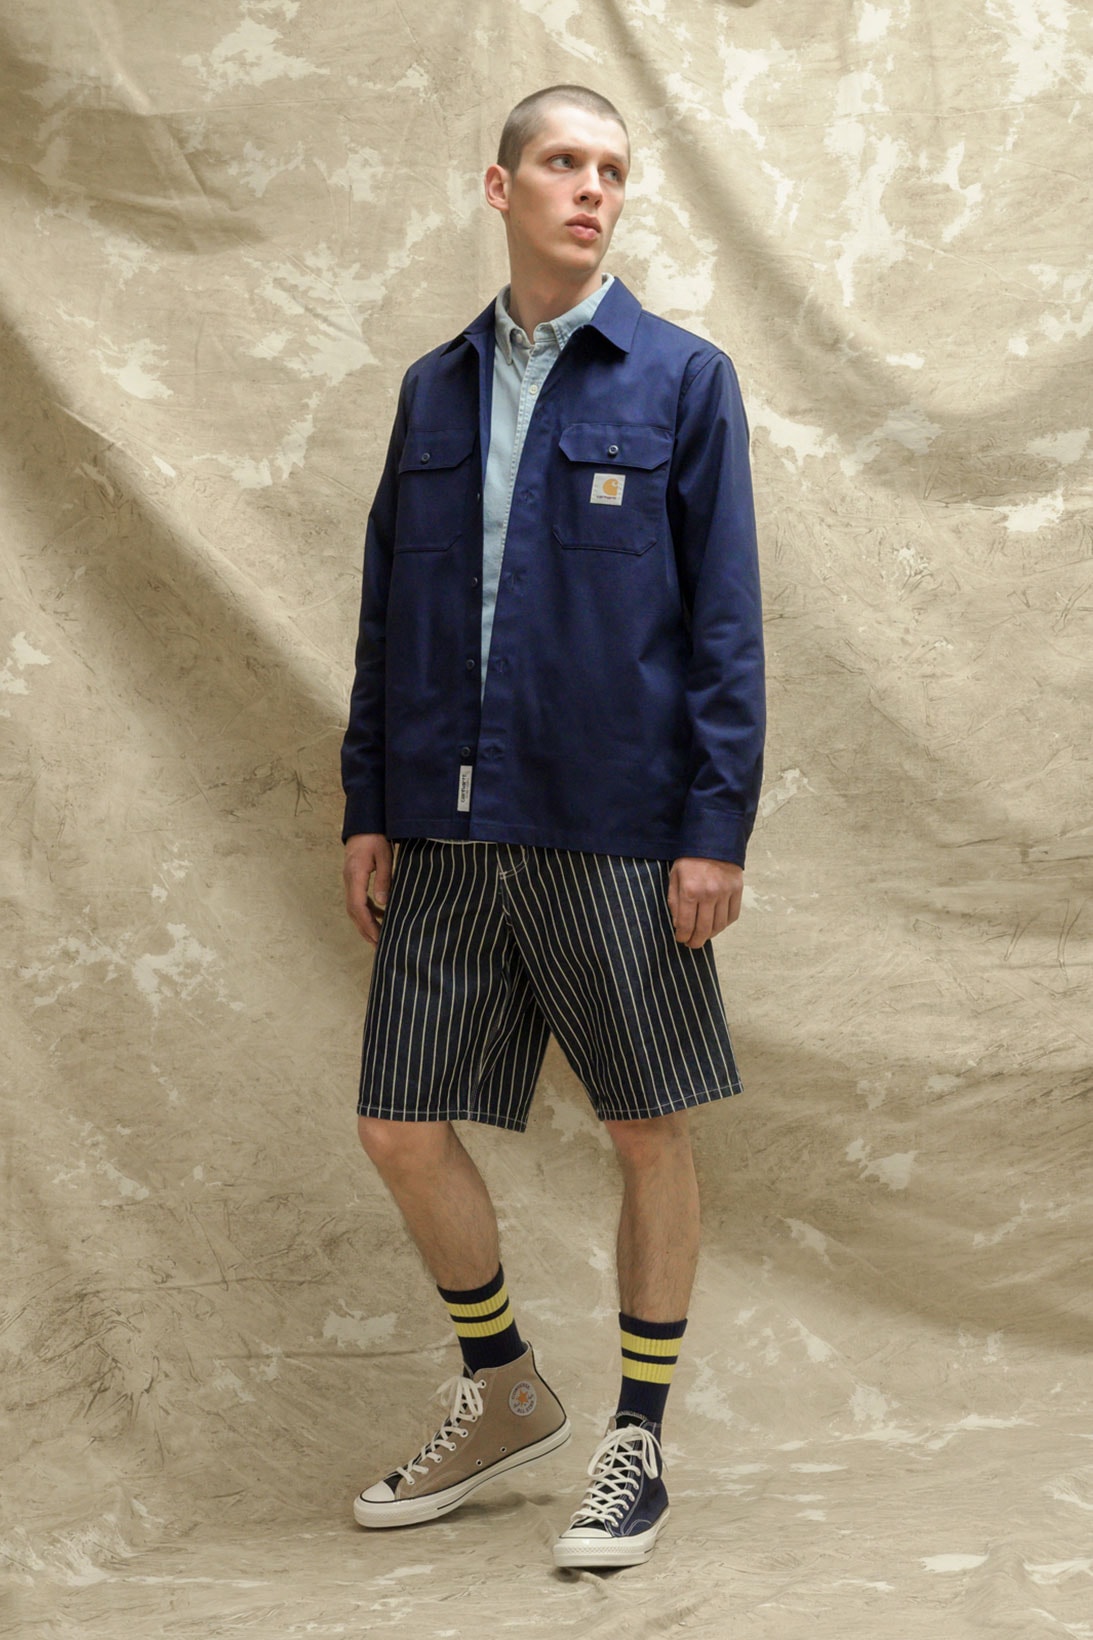 carhartt wip spring summer 2021 ss21 collection lookbook coach jacket striped shorts converse